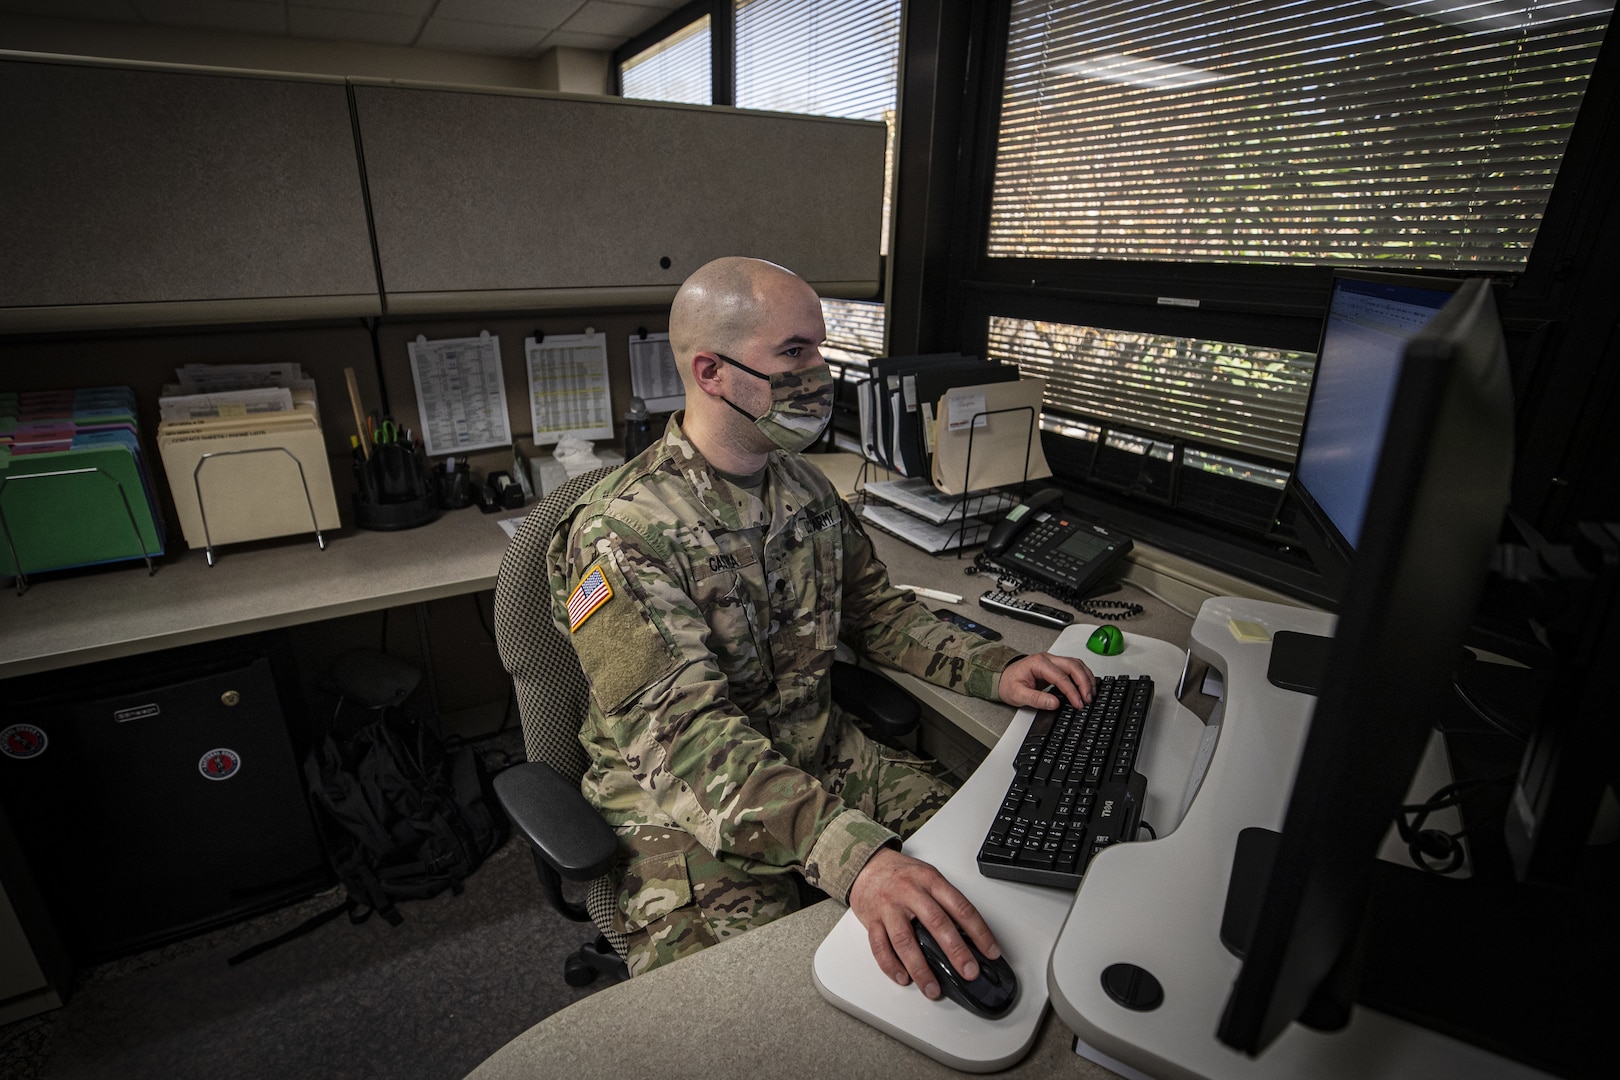 U.S. Army Spc. Benjamin Castria works in the New Jersey National Guard’s Joint Operations Center in the Homeland Security Center of Excellence, Lawrenceville, N.J., April 22, 2020.